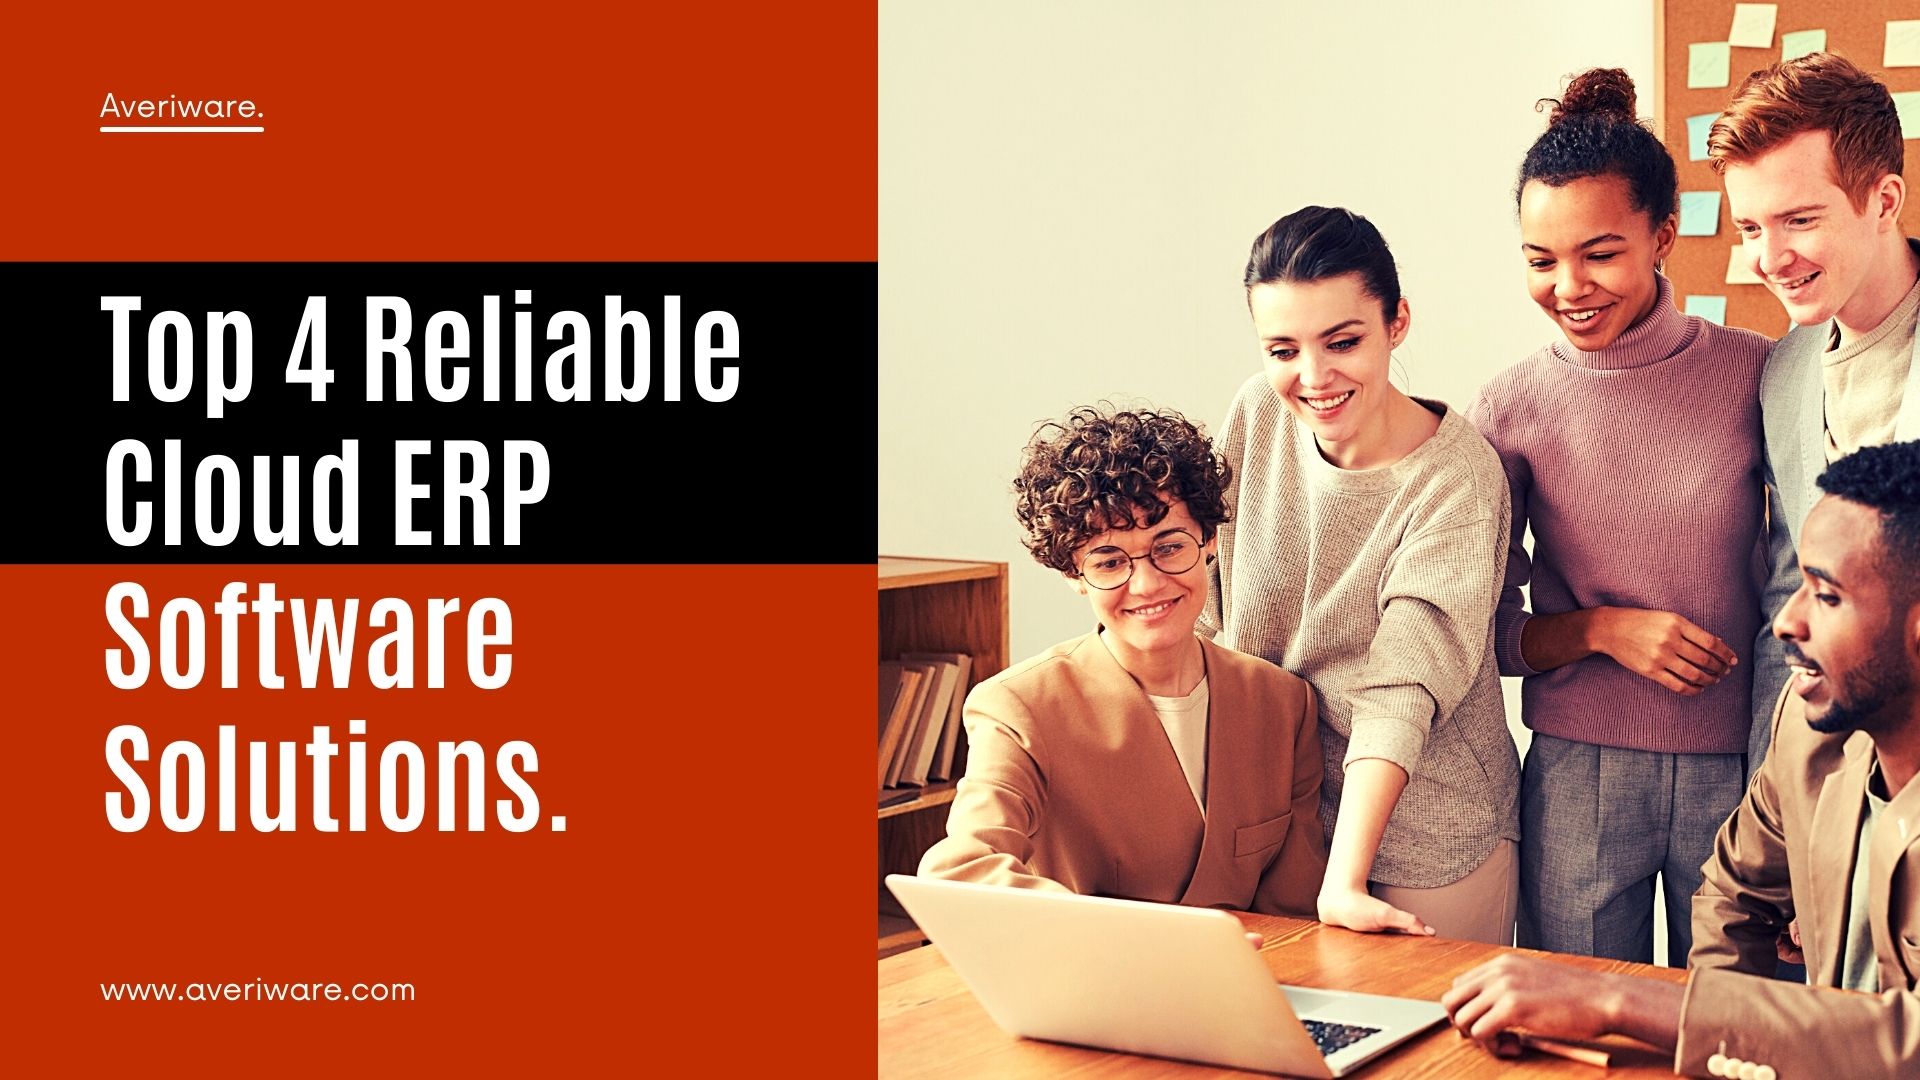 Top 4 Reliable Cloud ERP Software Solutions for Small-Medium Businesses